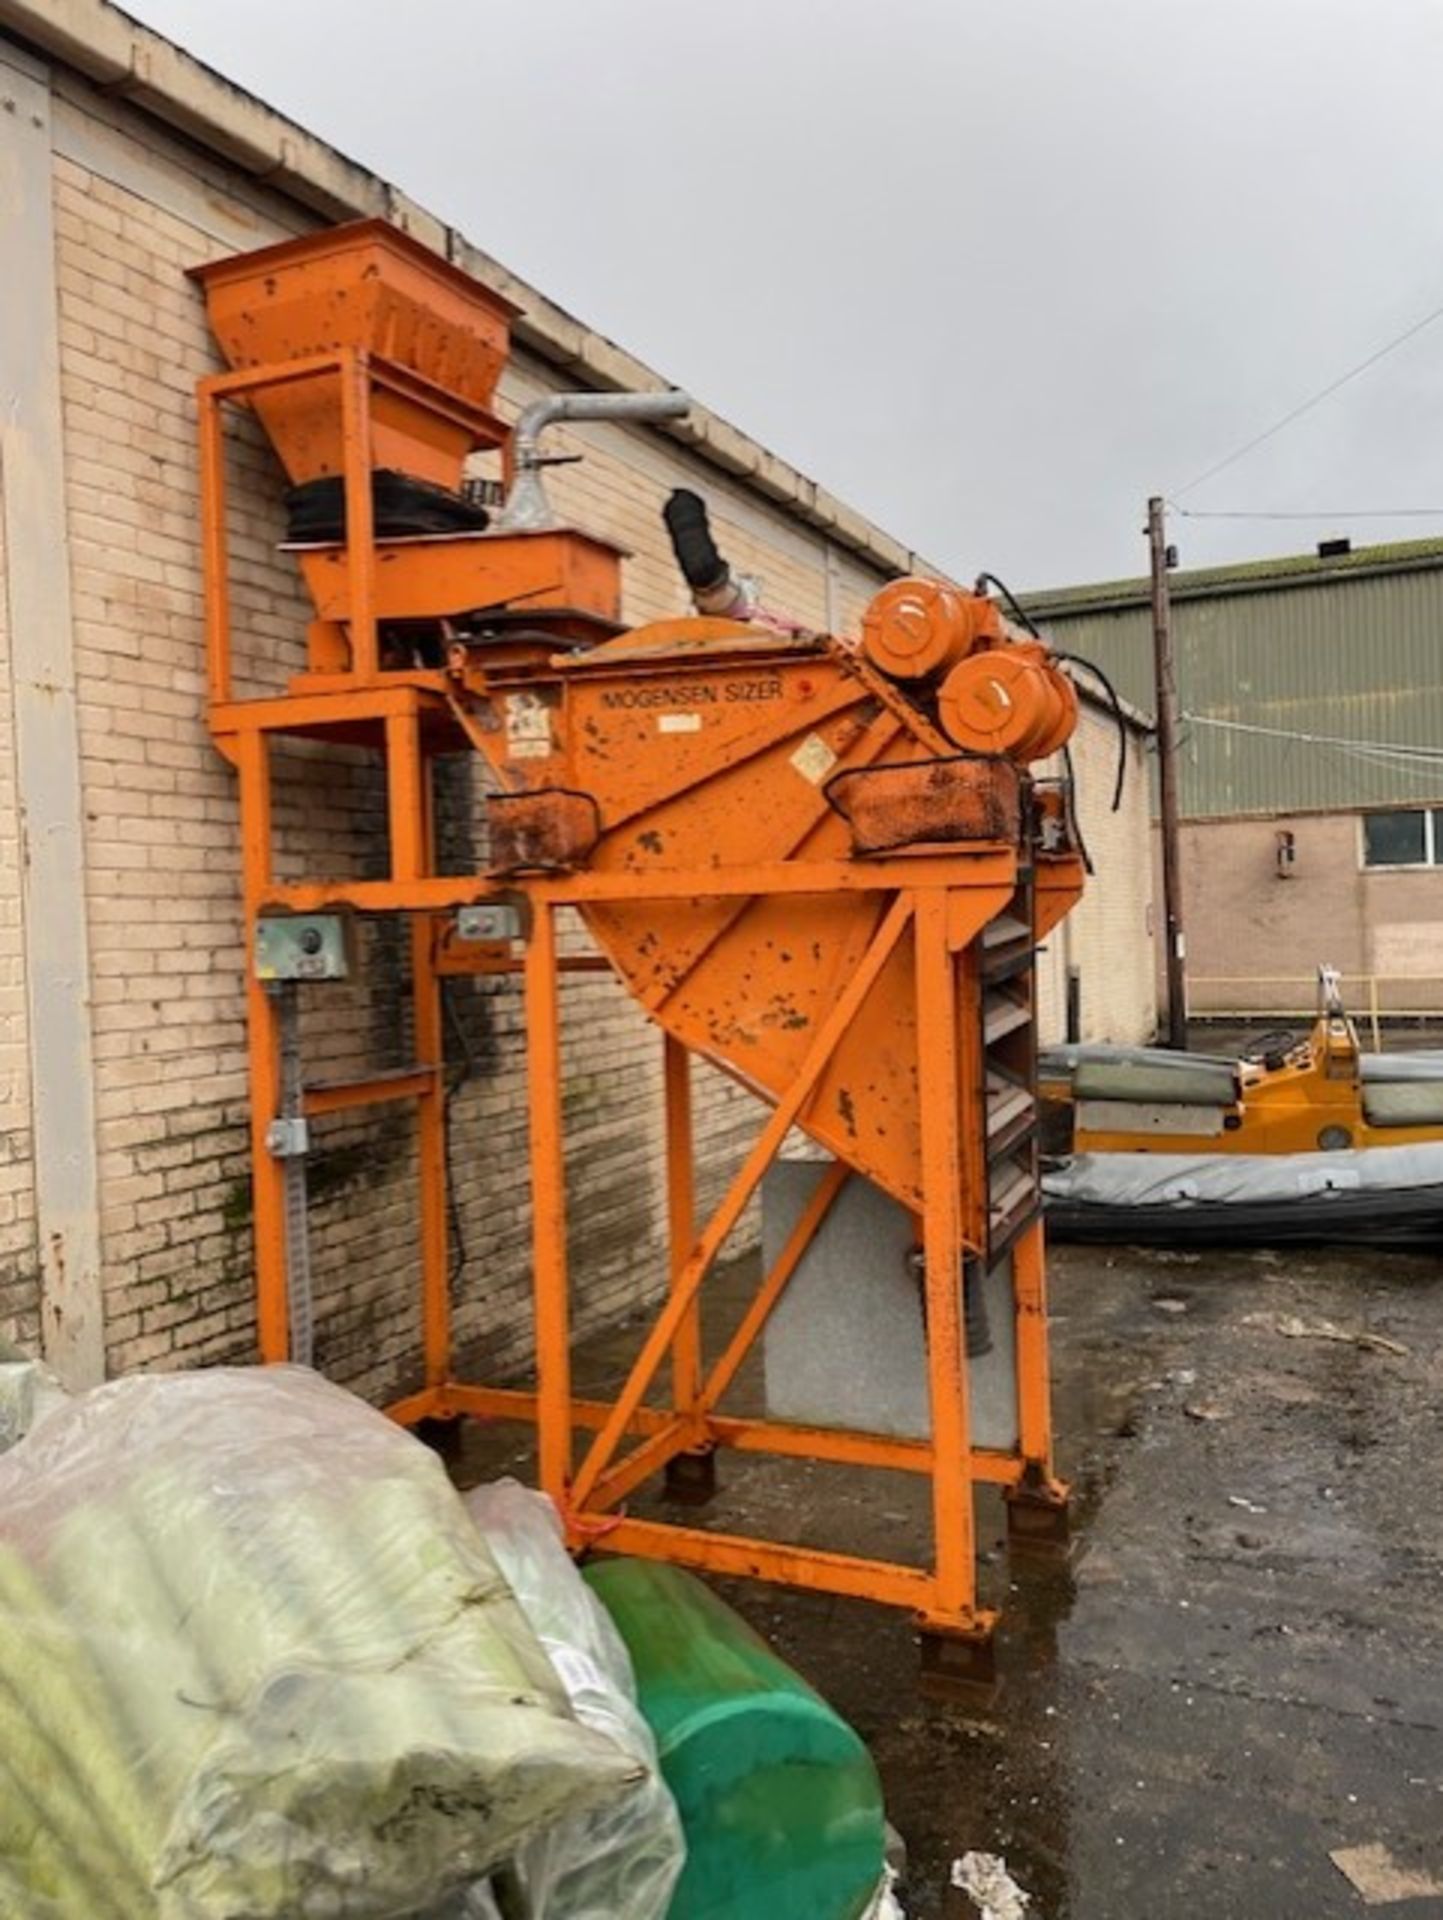 Crusher for crushing bricks 3 phase electric motors on it please note it hasnt got the  power to - Bild 3 aus 3